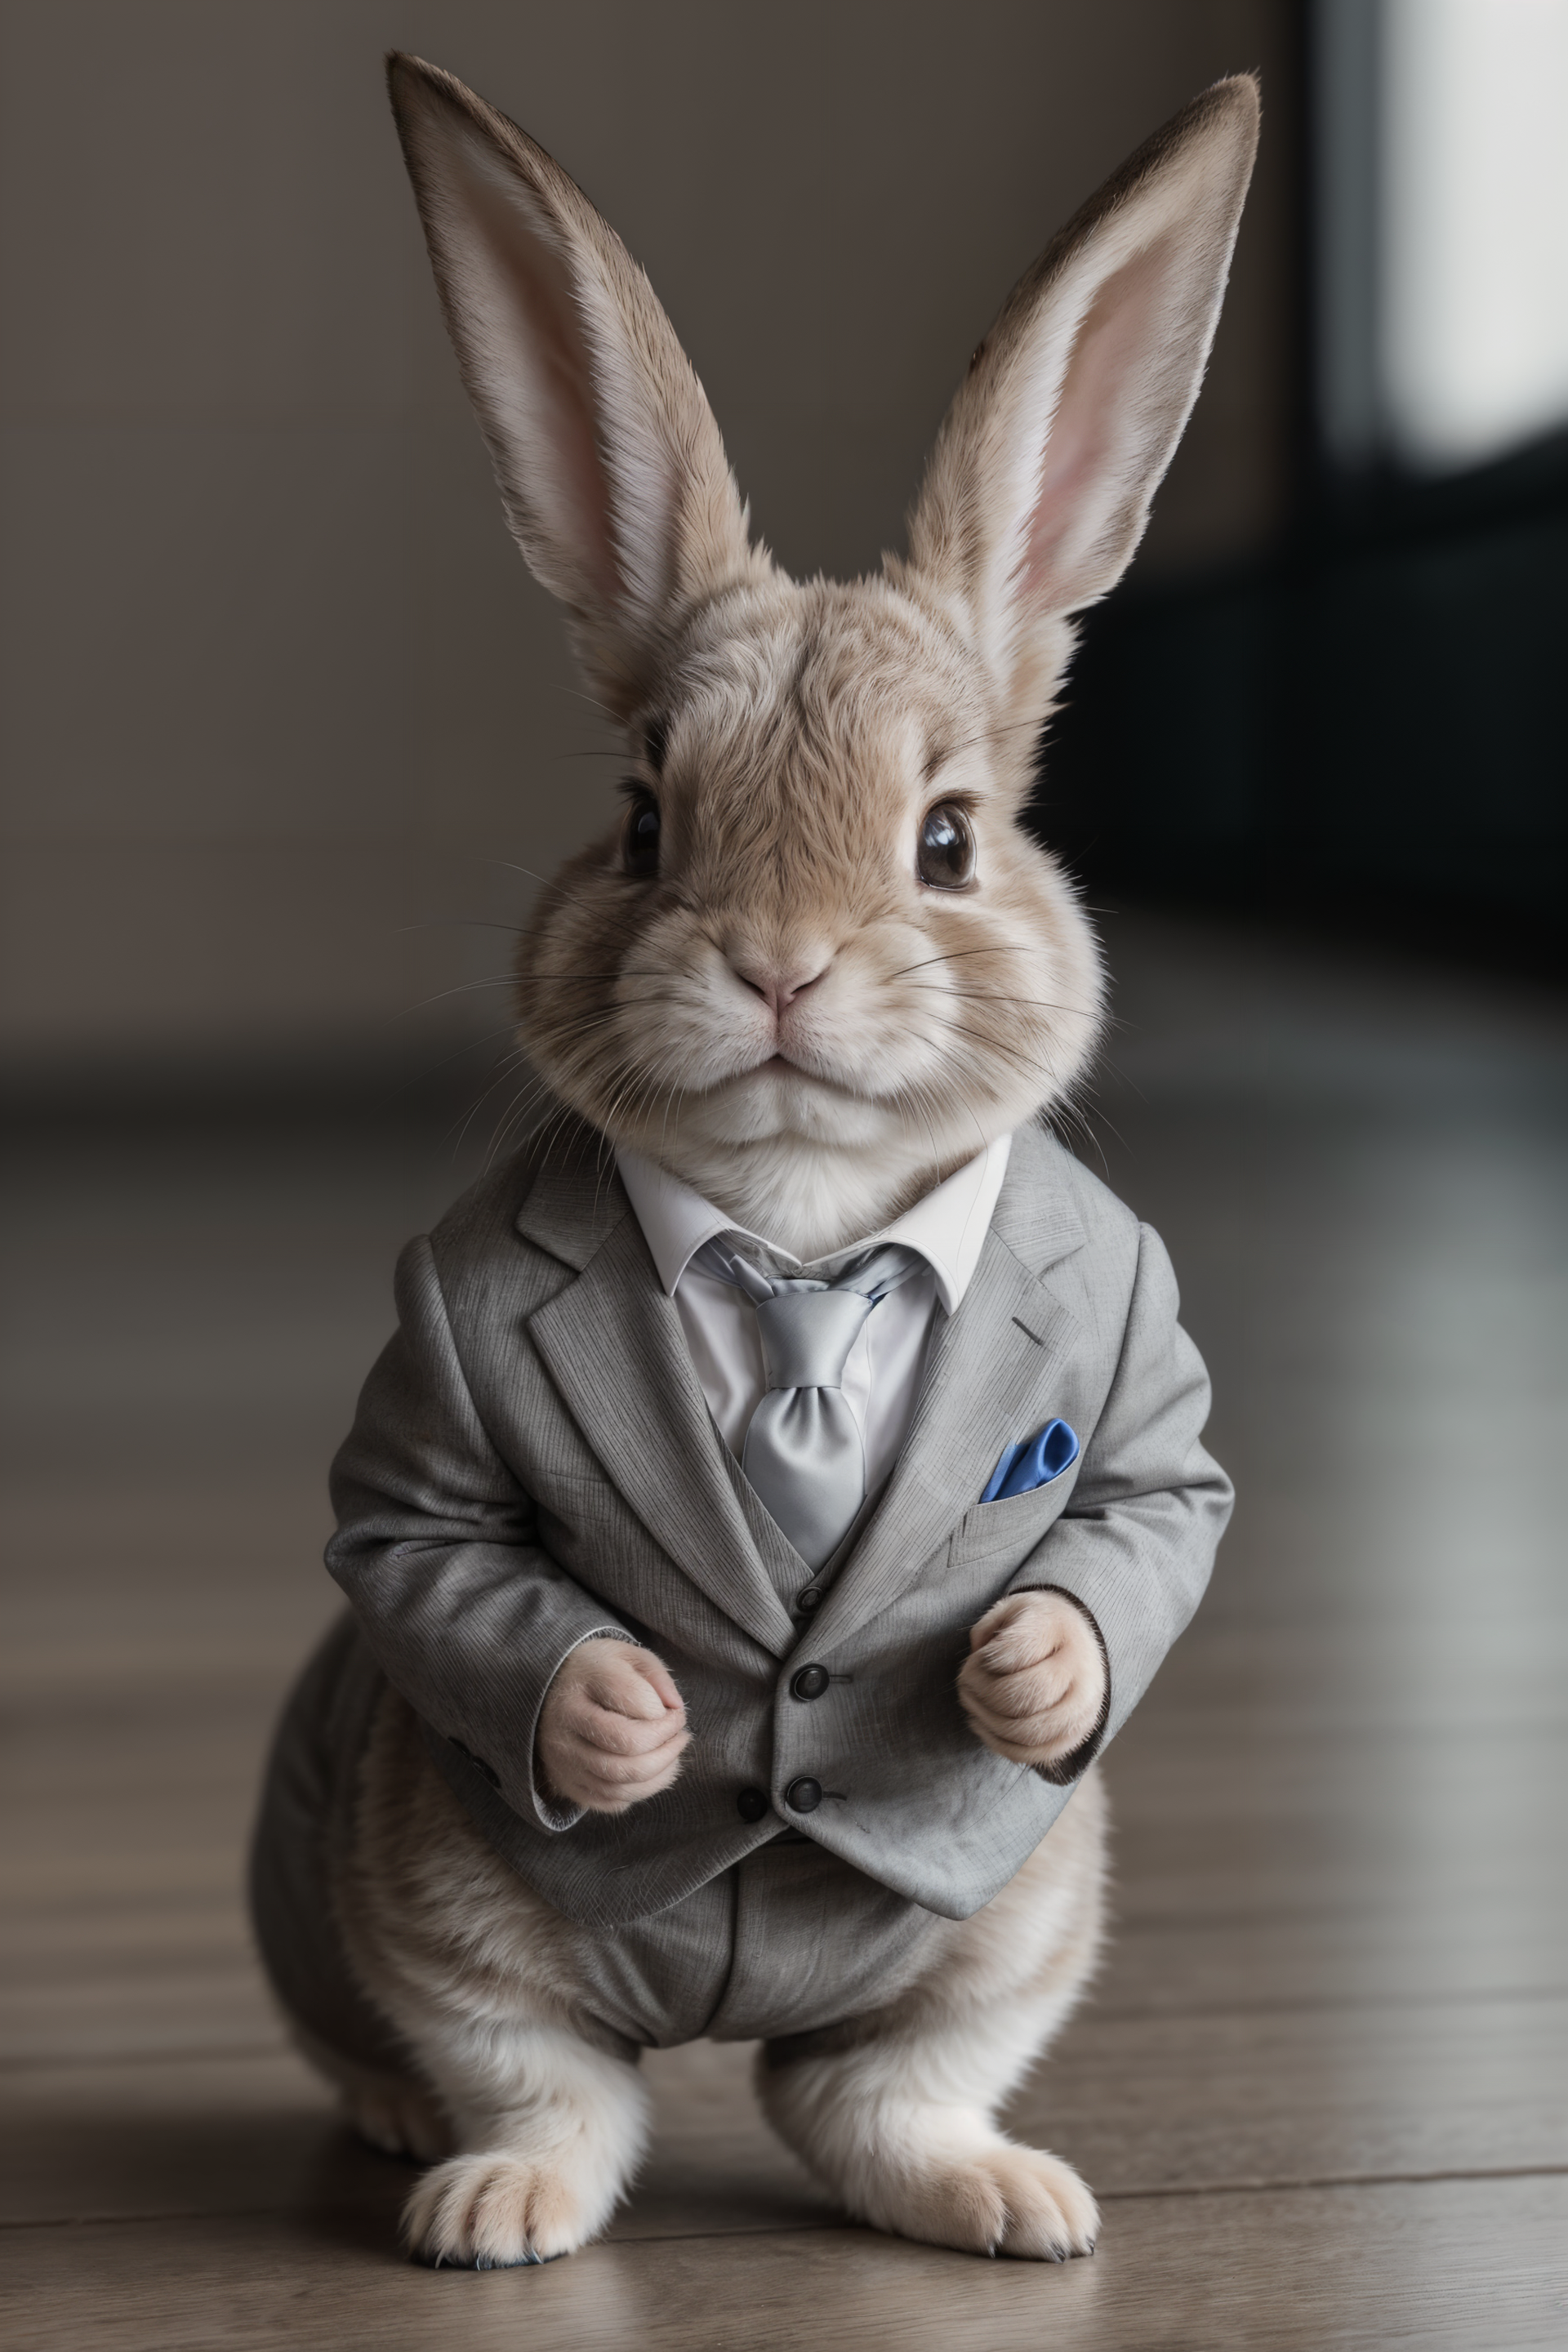 A charming photo of a small bunny. He is wearing a suit. masterpiece, ultra-quality, hyperrealistic, RAW photo, highly det...